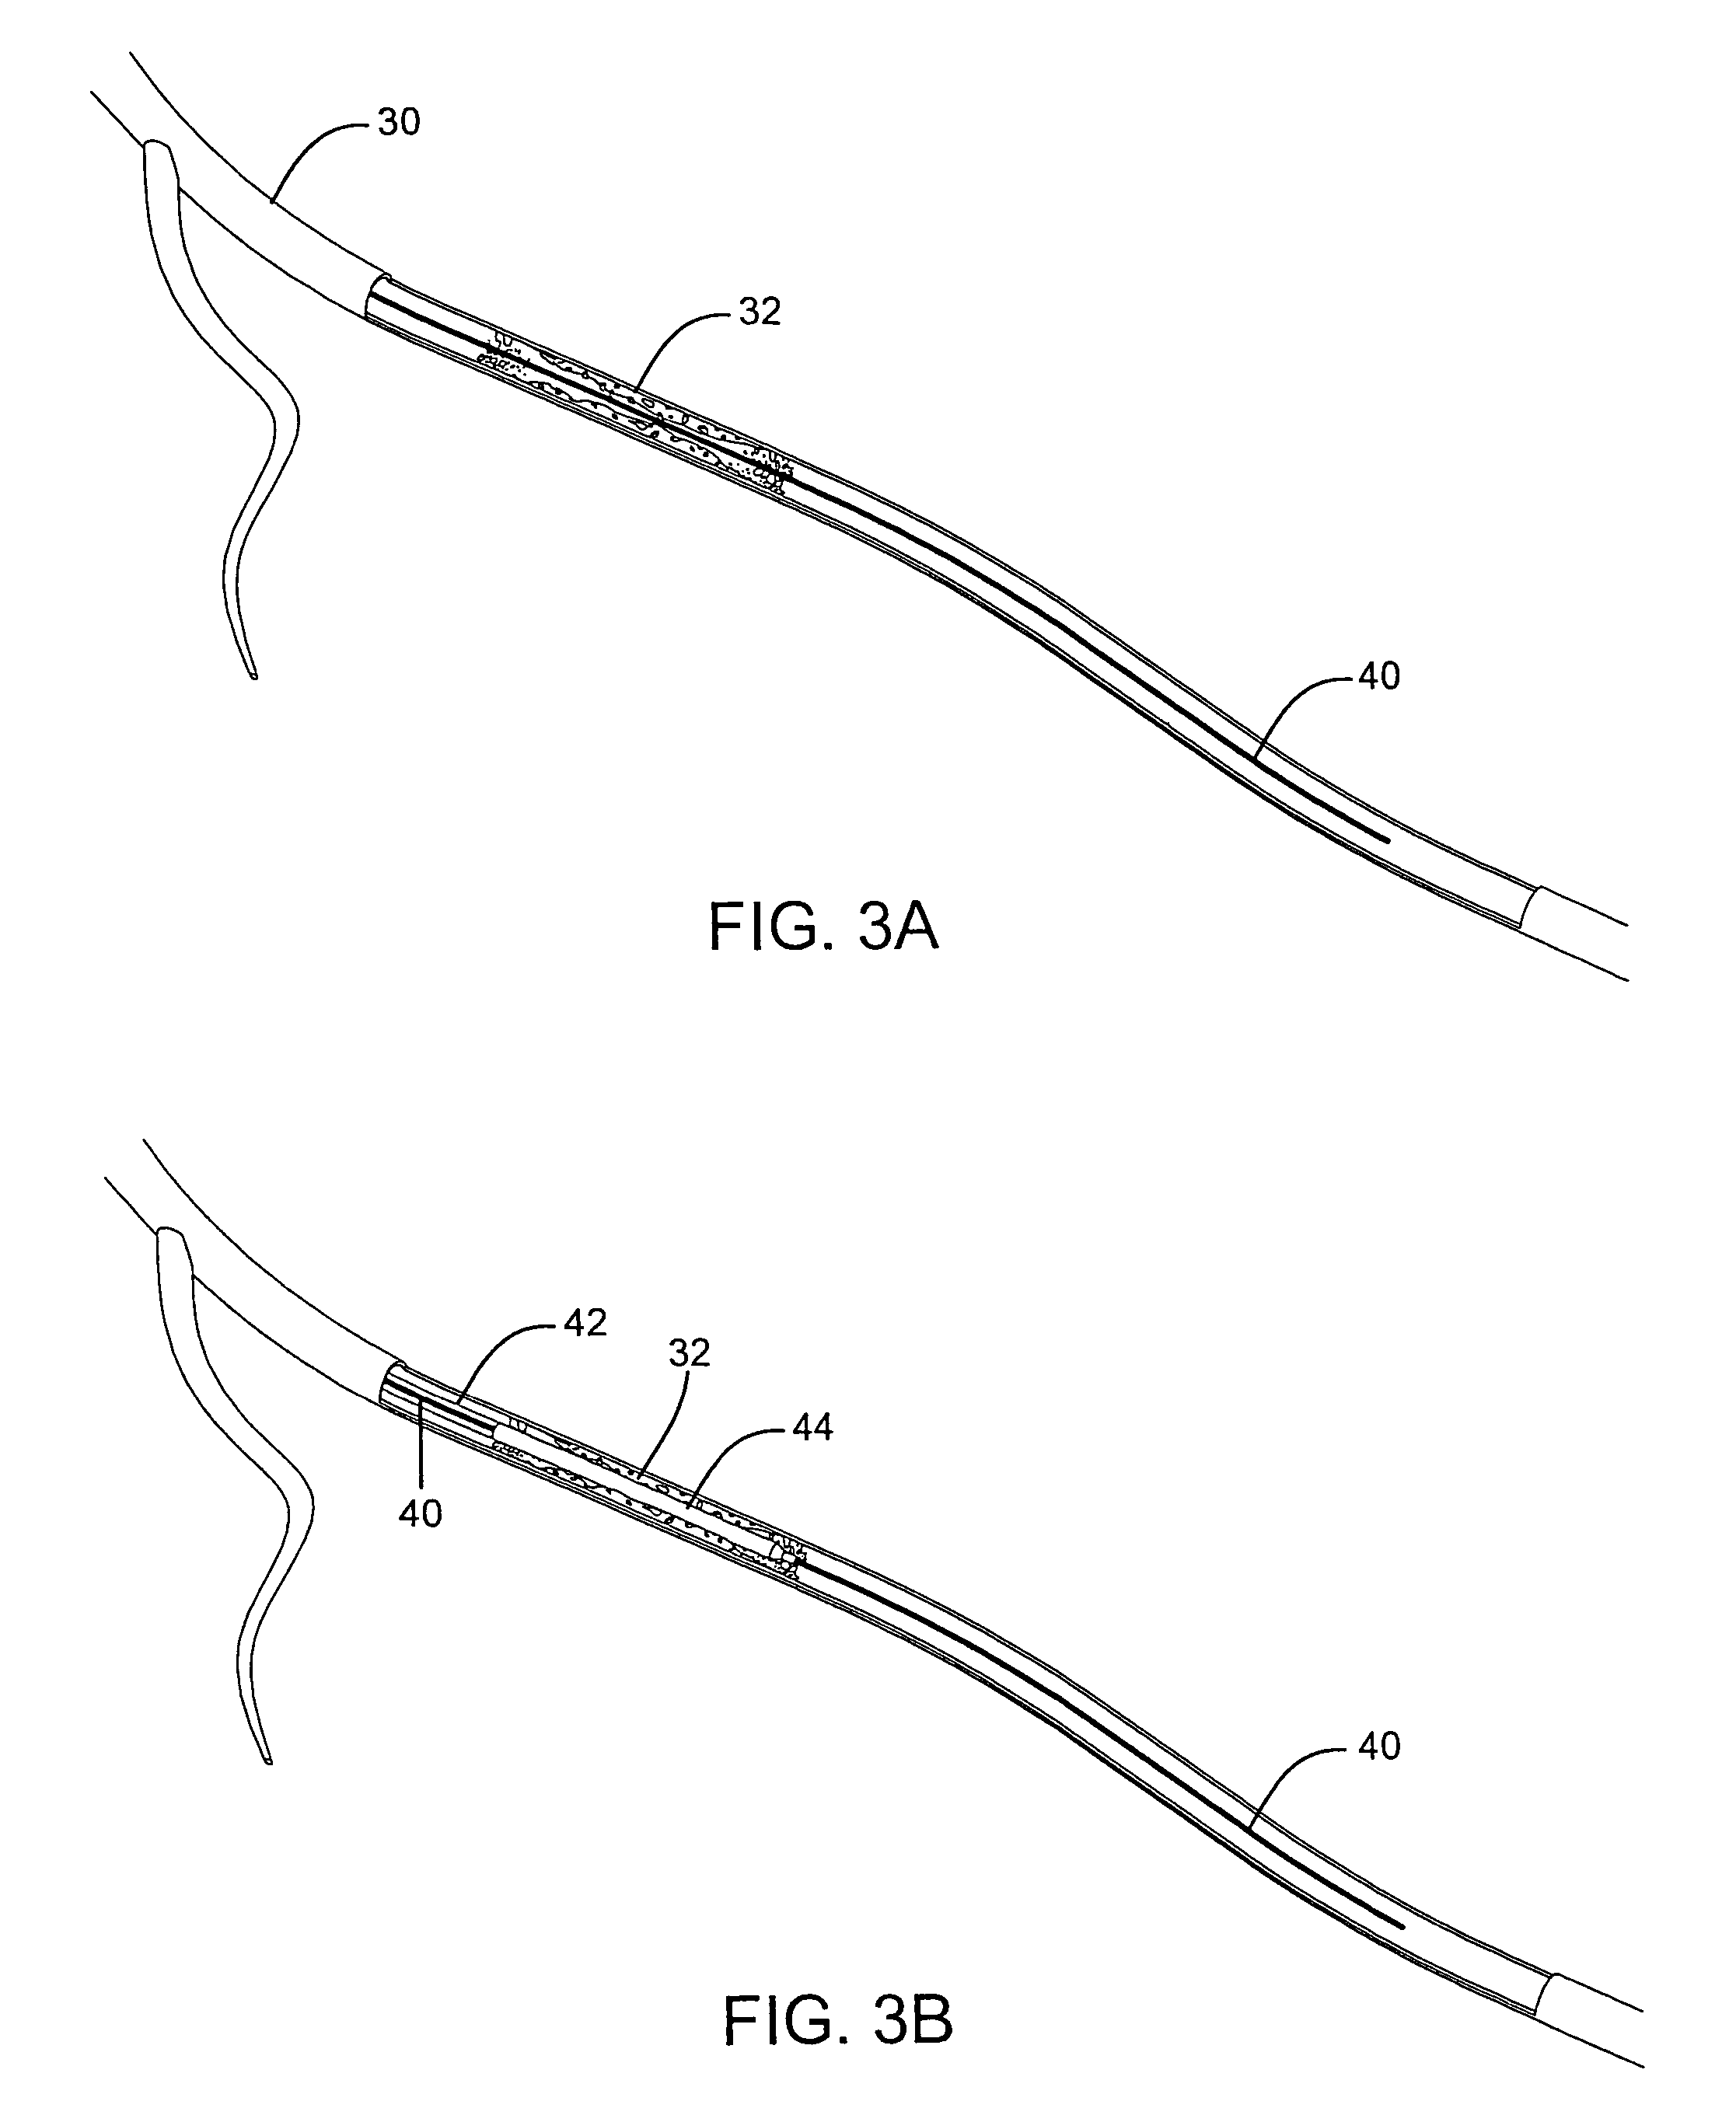 Corewire actuated delivery system with fixed distal stent-carrying extension